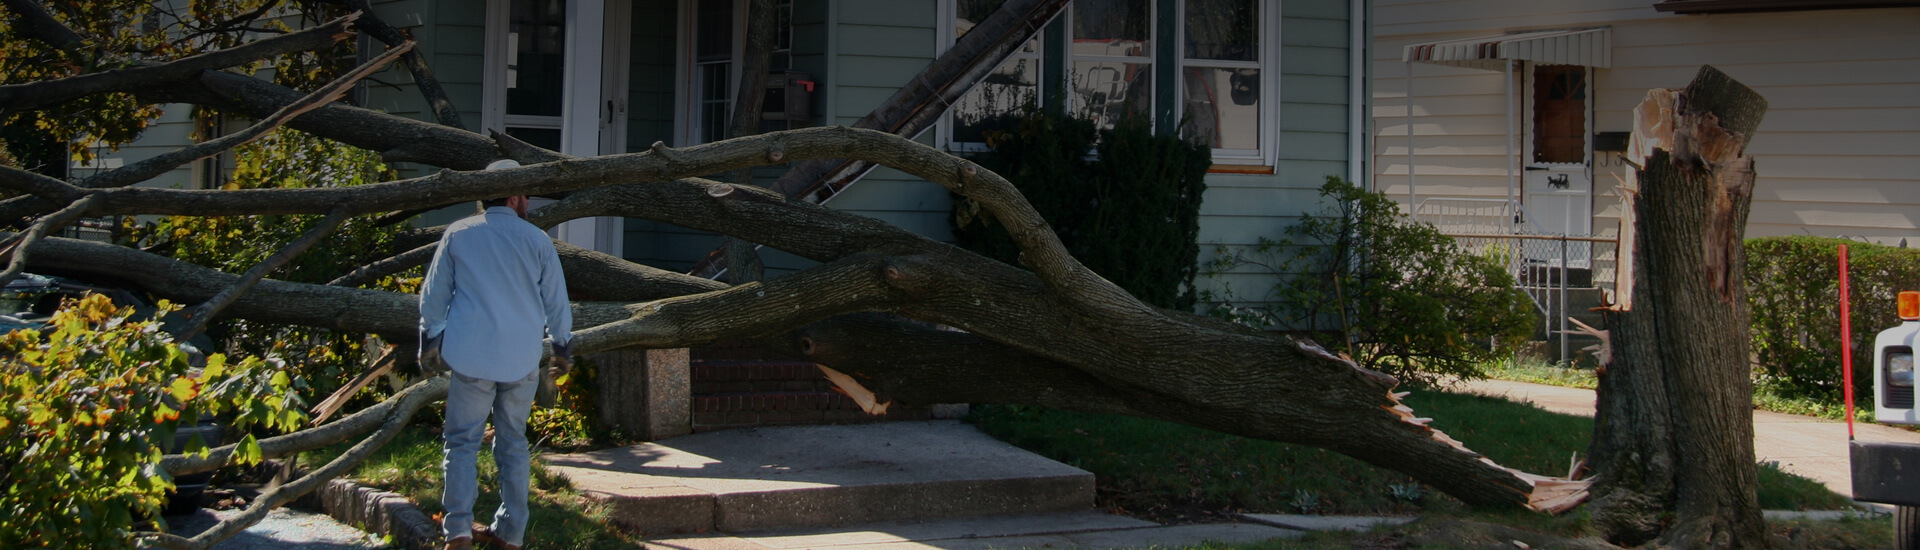 A photo of a tree that fell in front of a house